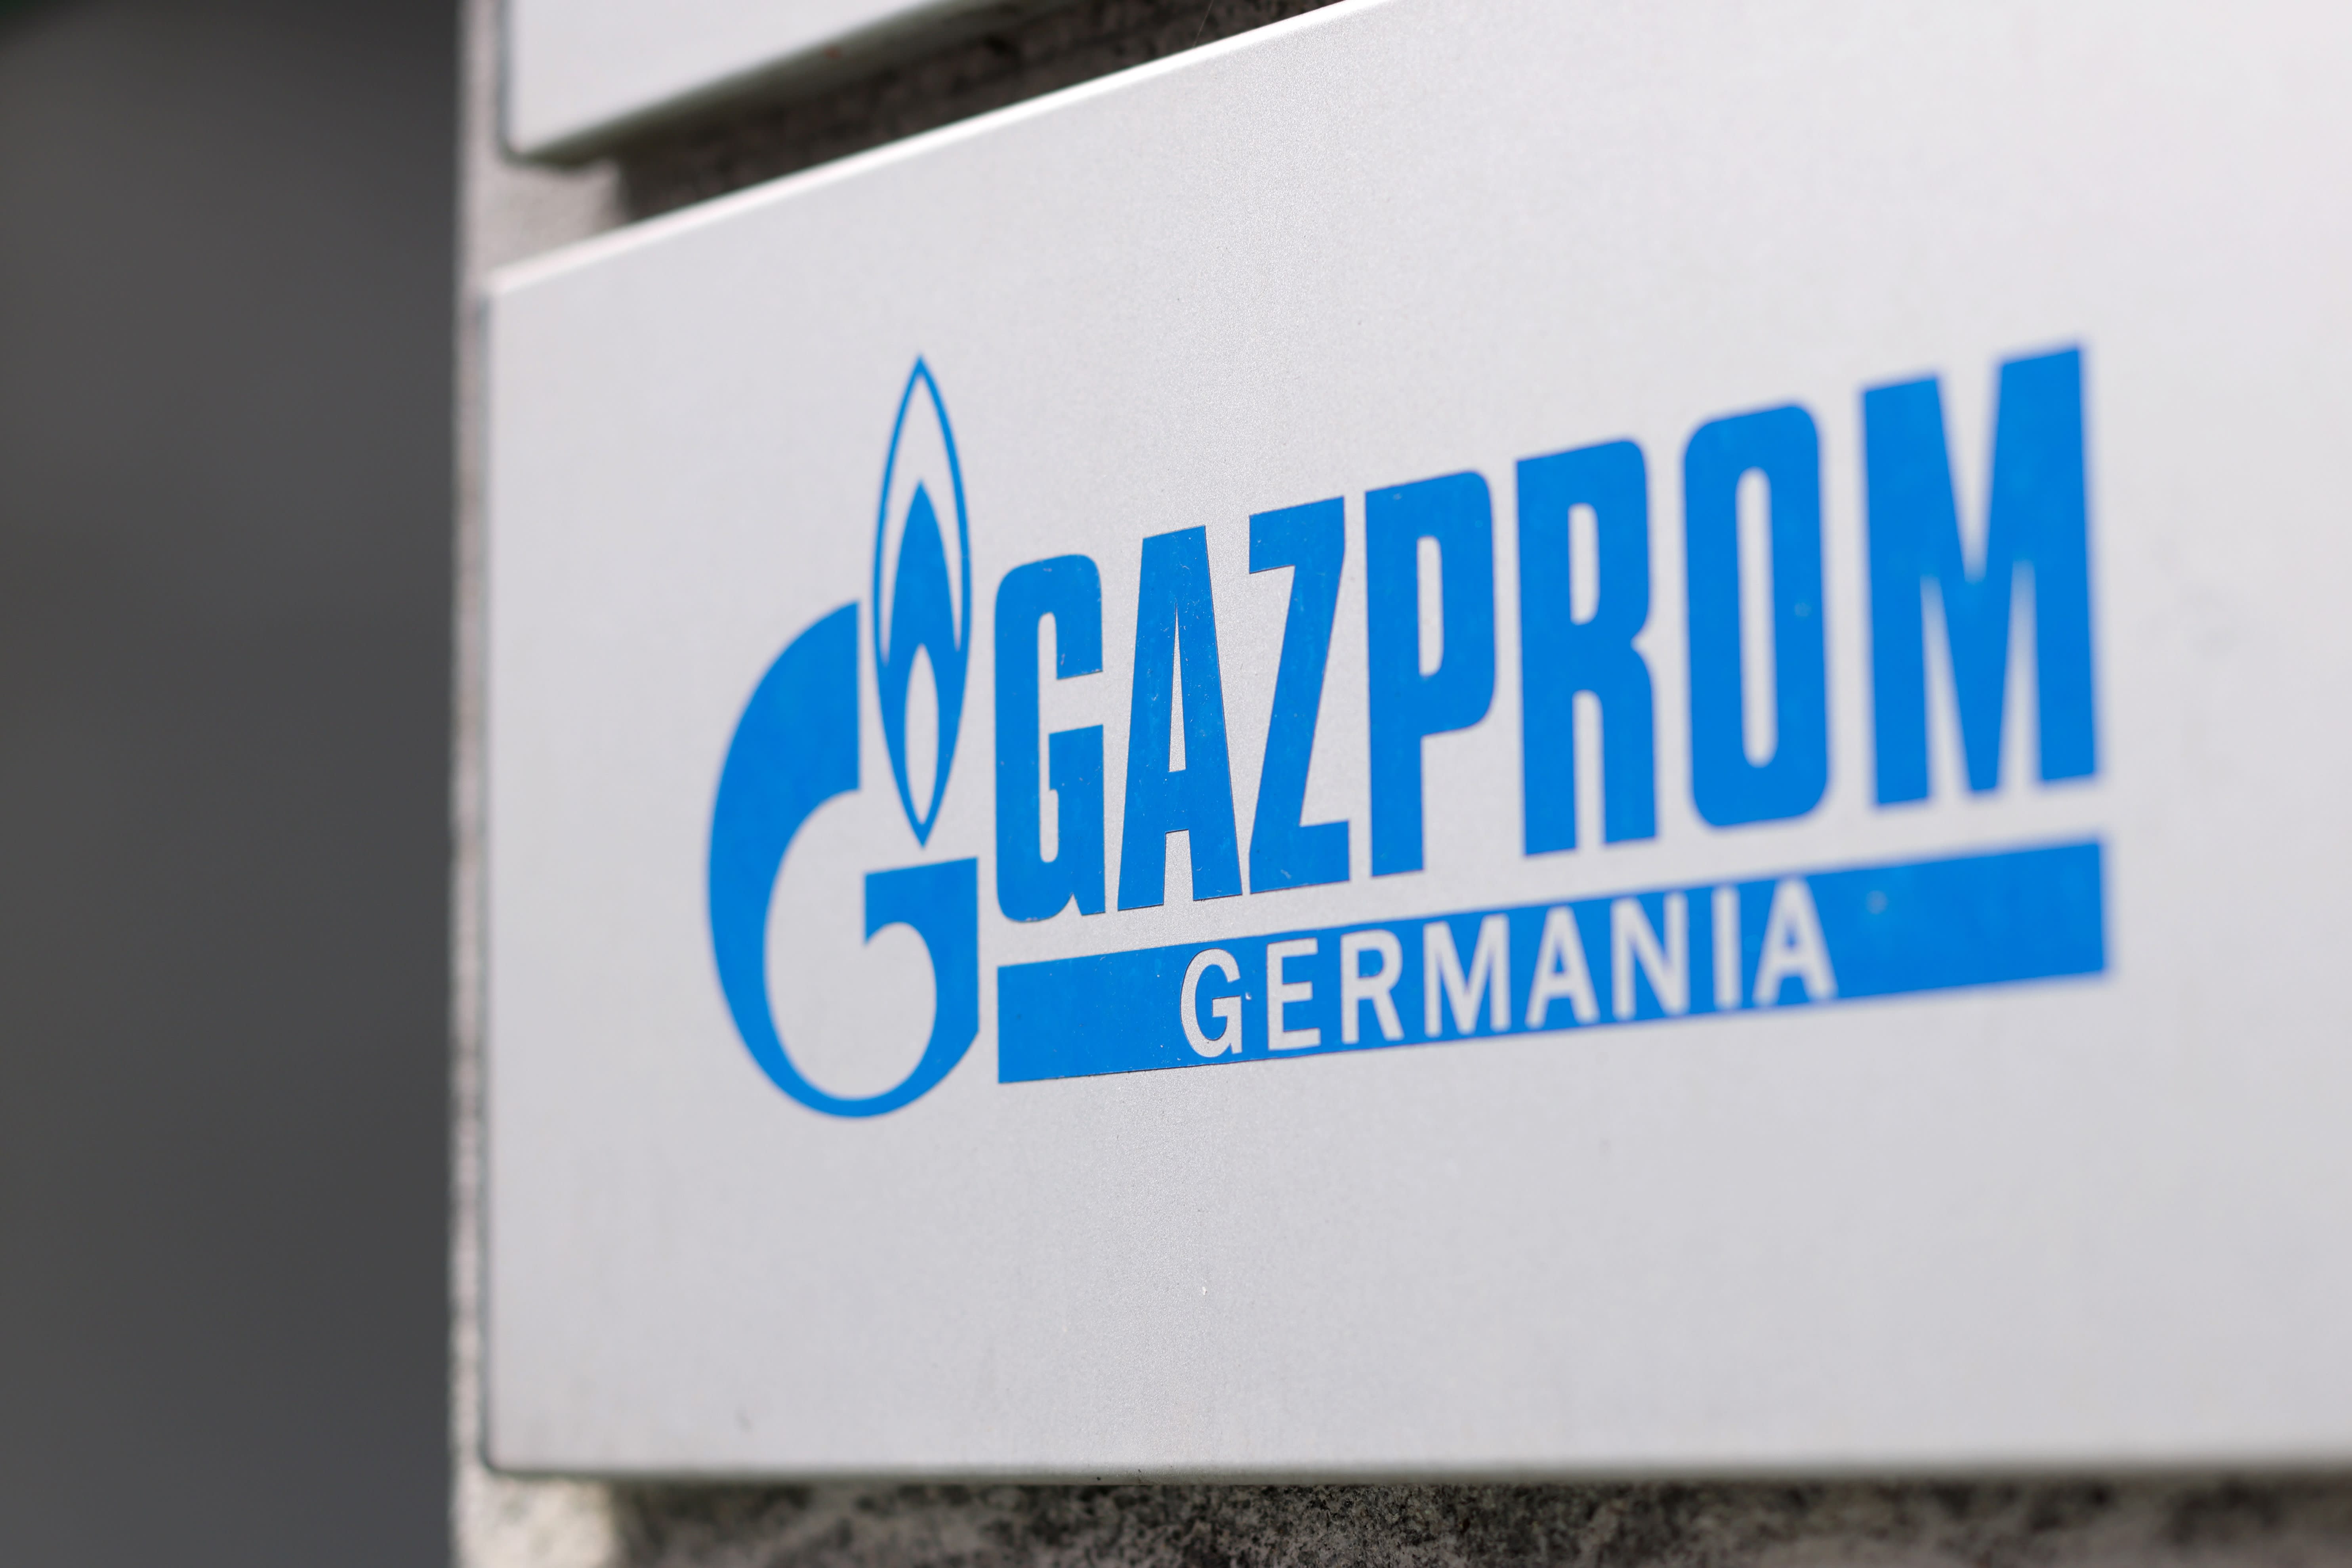 Russia nears gas shutdown Germany rejects as contracts fulfill it claims can\'t in Europe